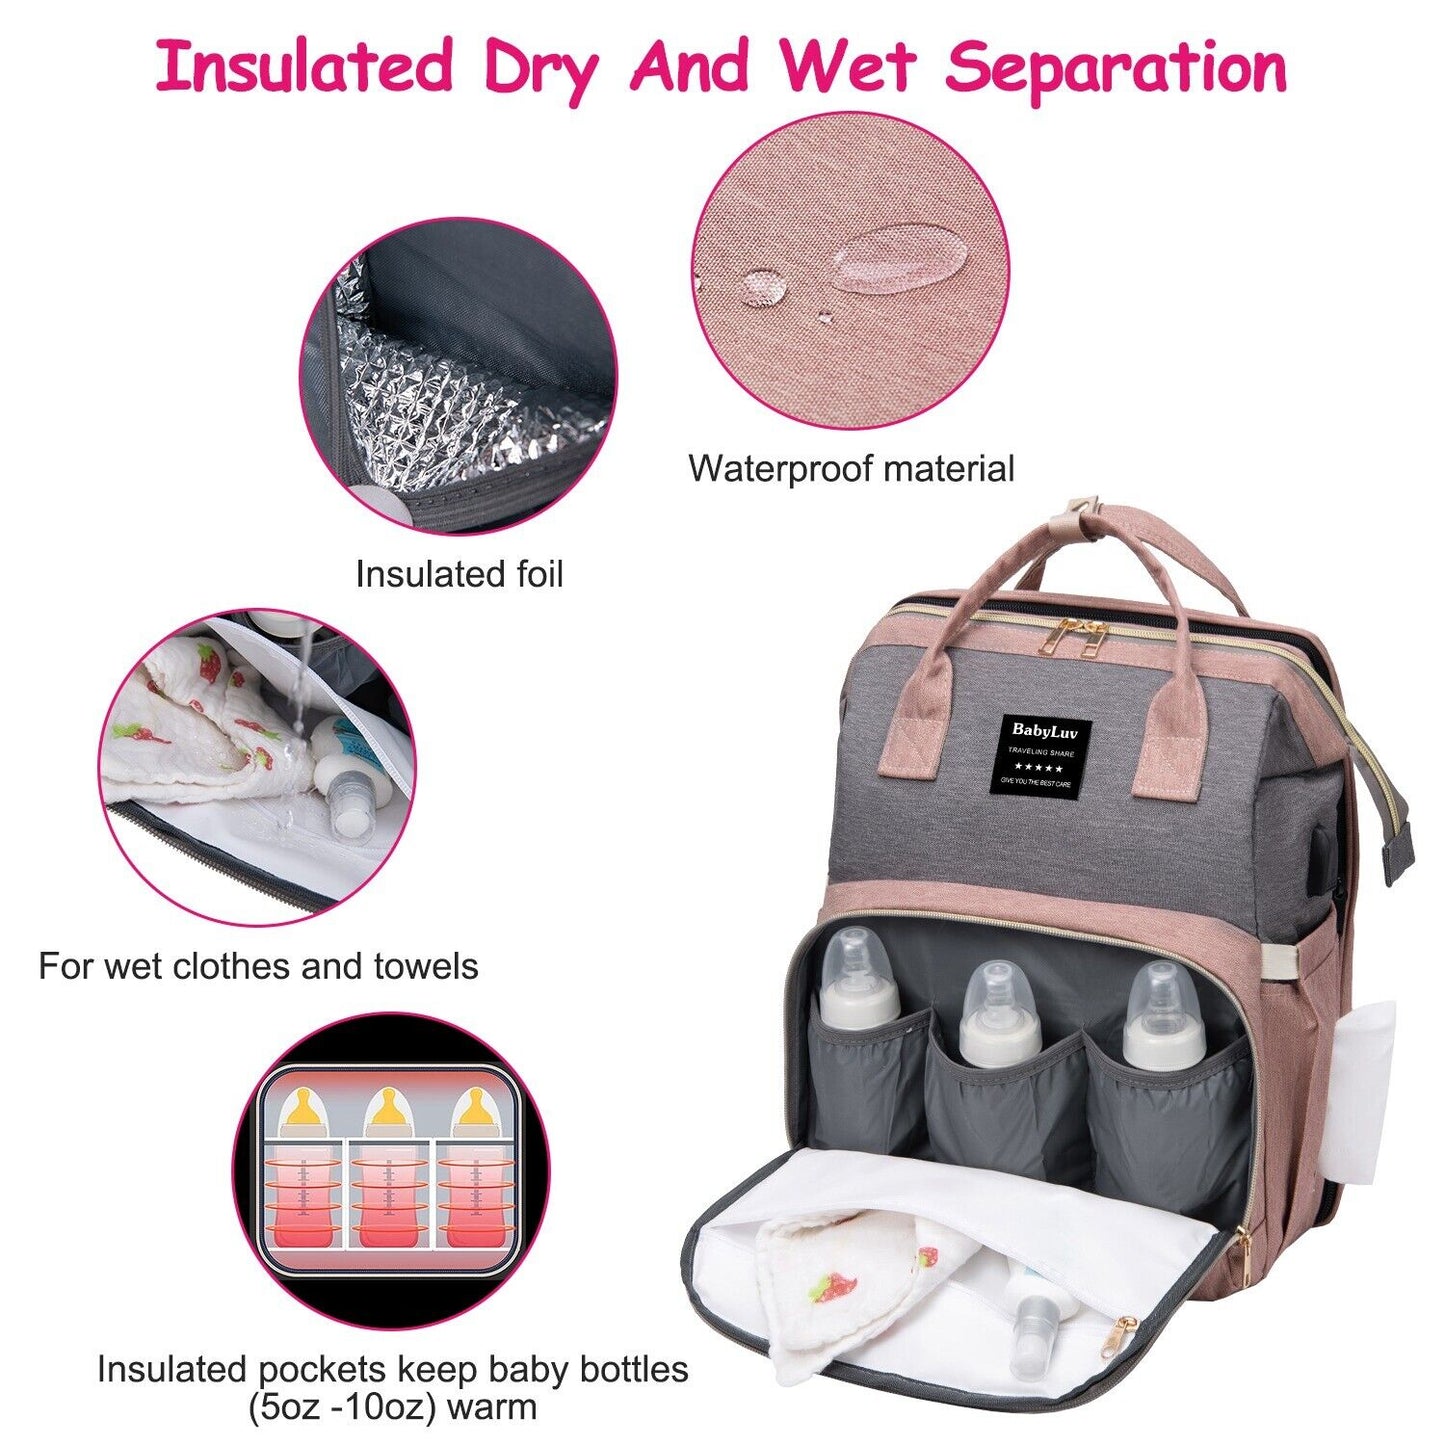 3-in-1 Baby Diaper Bag Backpack with Changing Station Portable Mommy Travel Bag